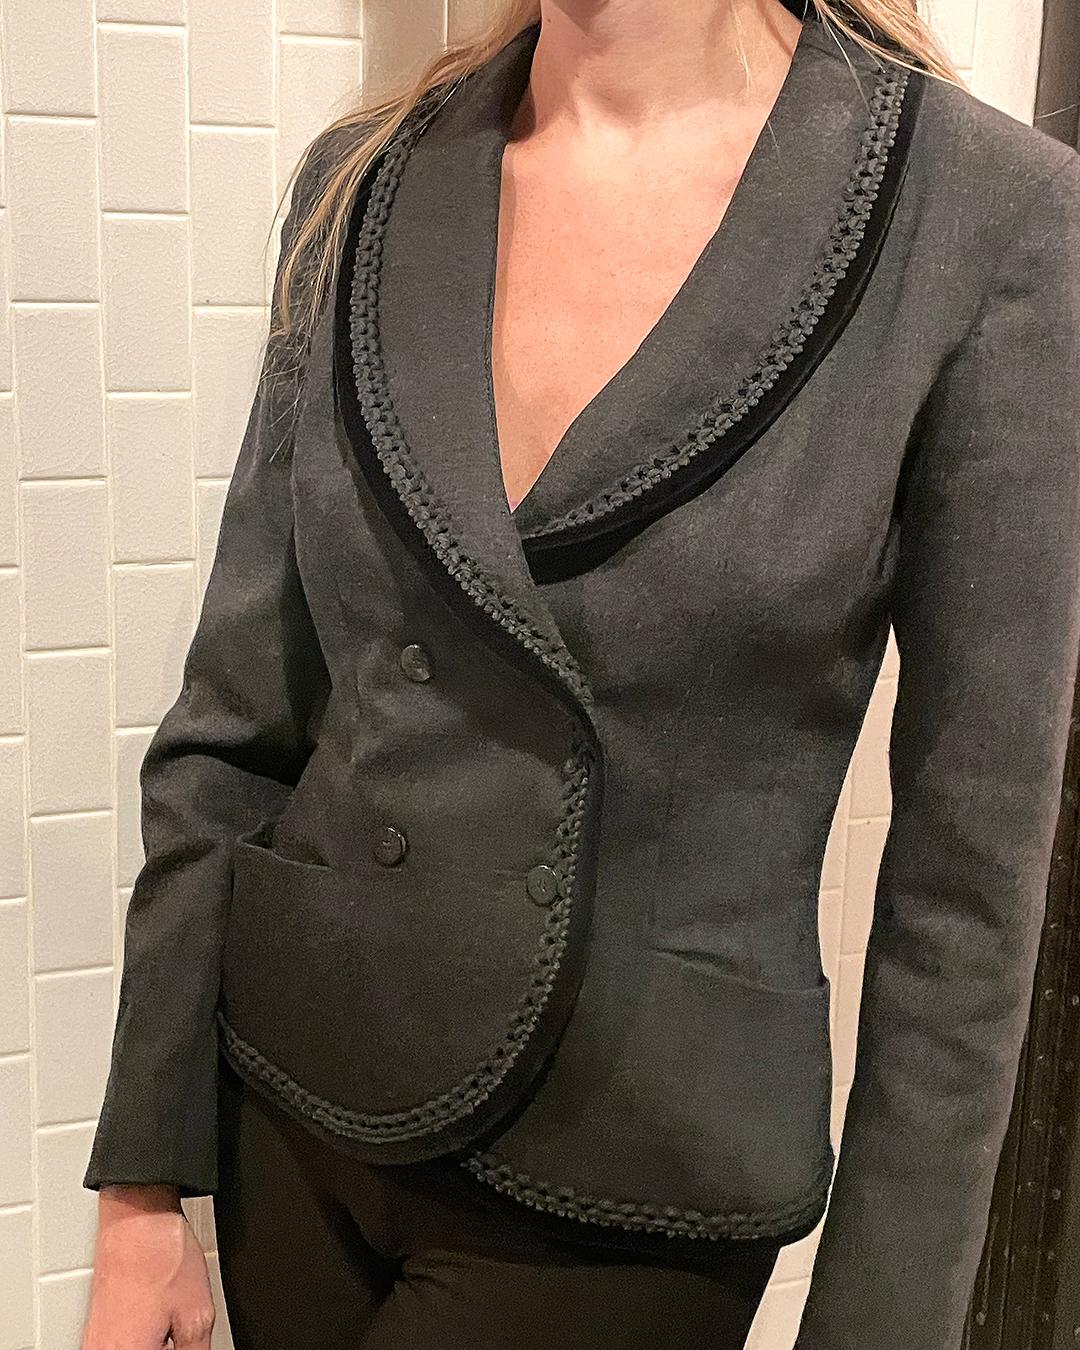 Blumarine Vintage Virgin Wool Blazer In Excellent Condition For Sale In New York, NY